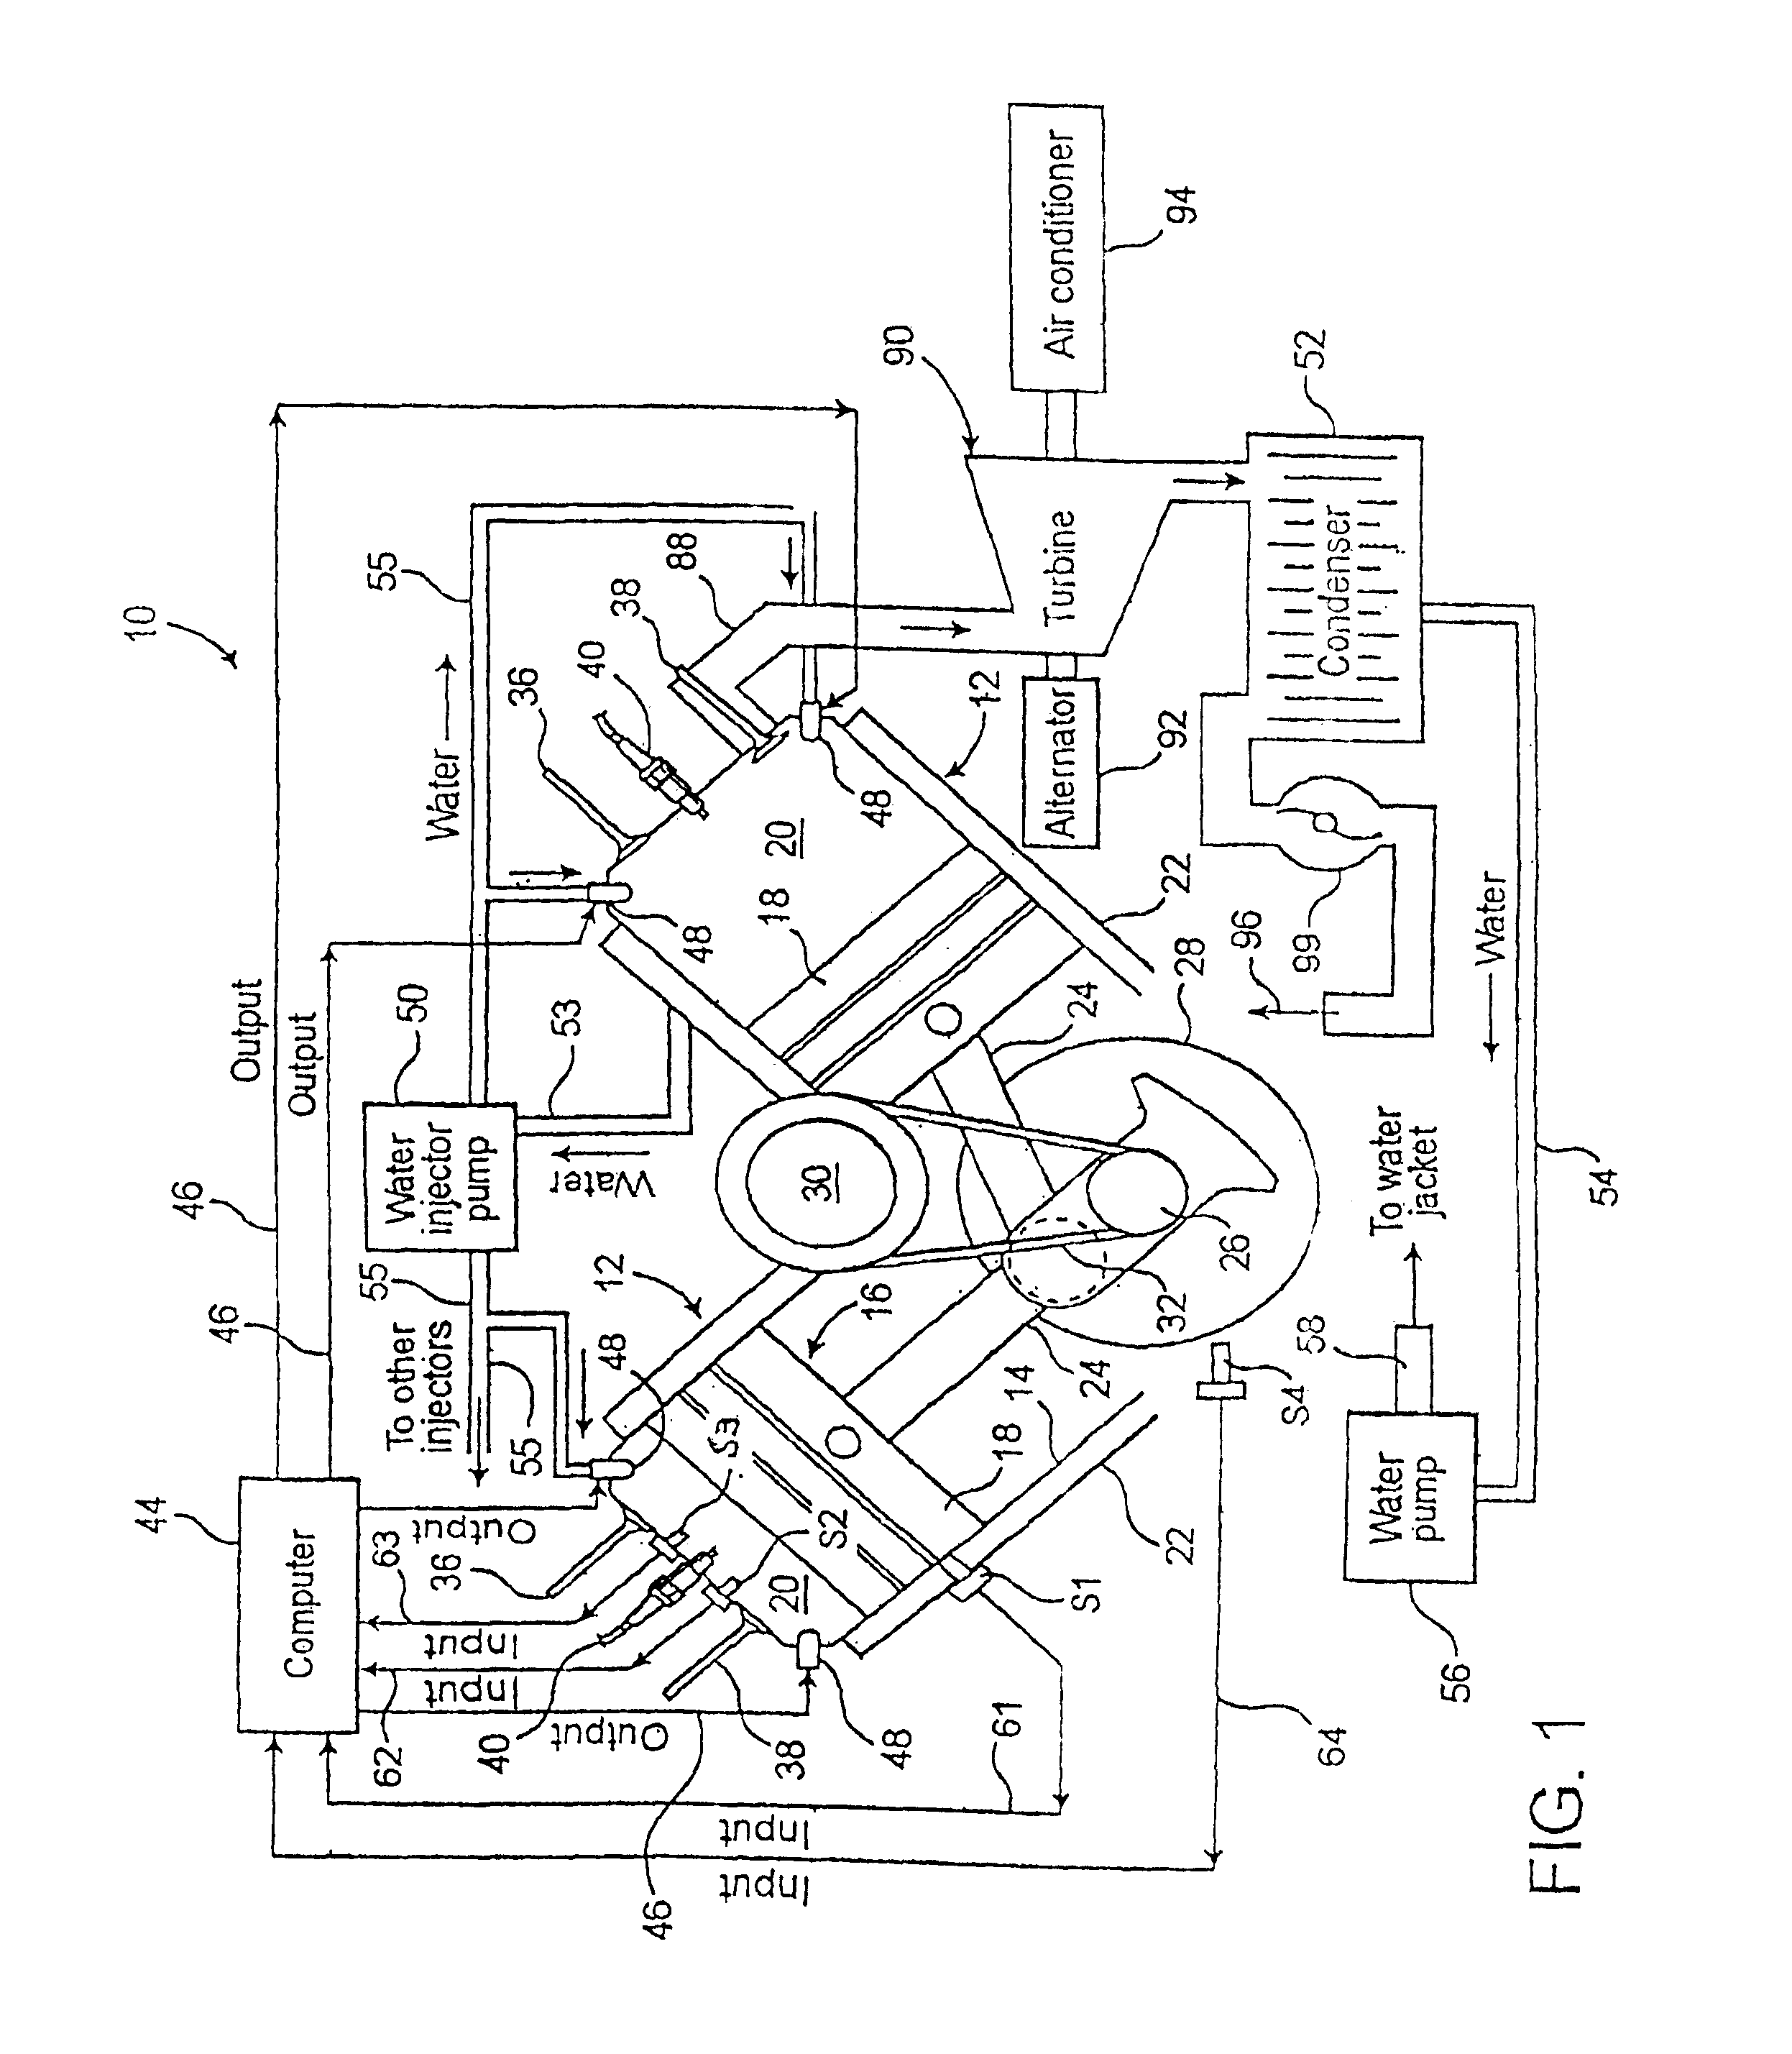 Computer controlled multi-stroke cycle power generating assembly and method of operation